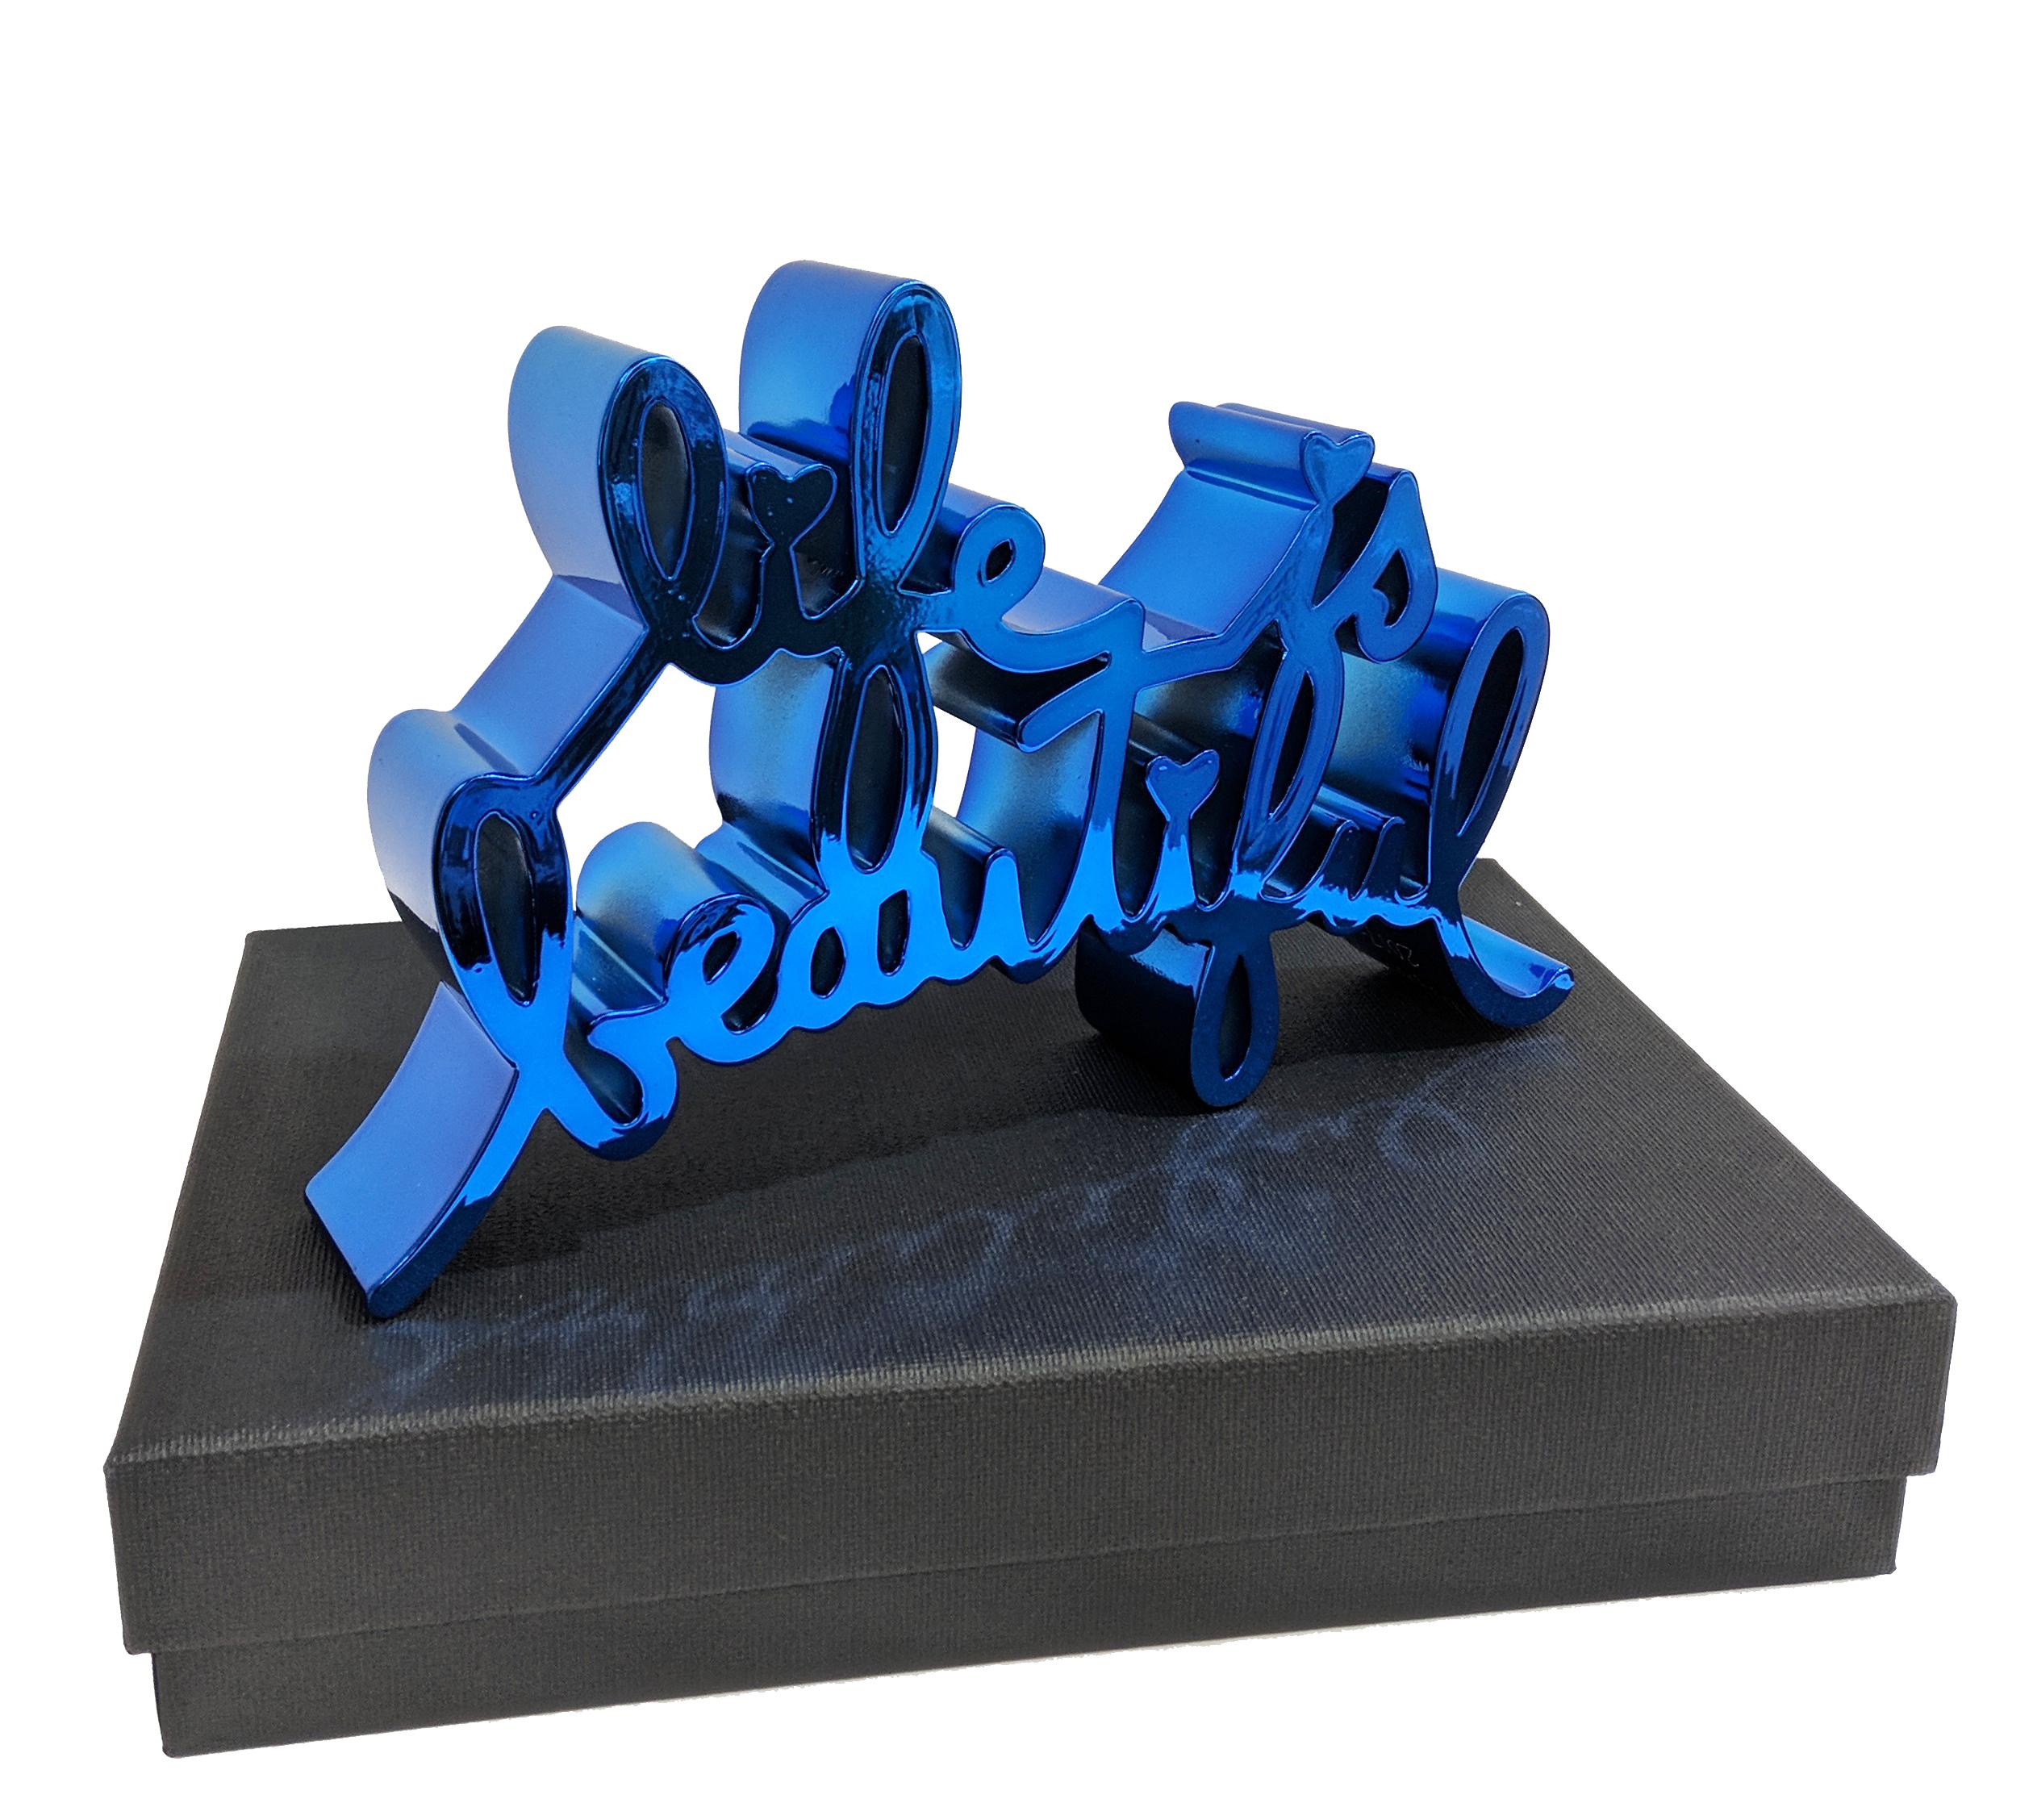 Mr Brainwash Abstract Sculpture - LIFE IS BEAUTIFUL (HARD CANDY BLUE)